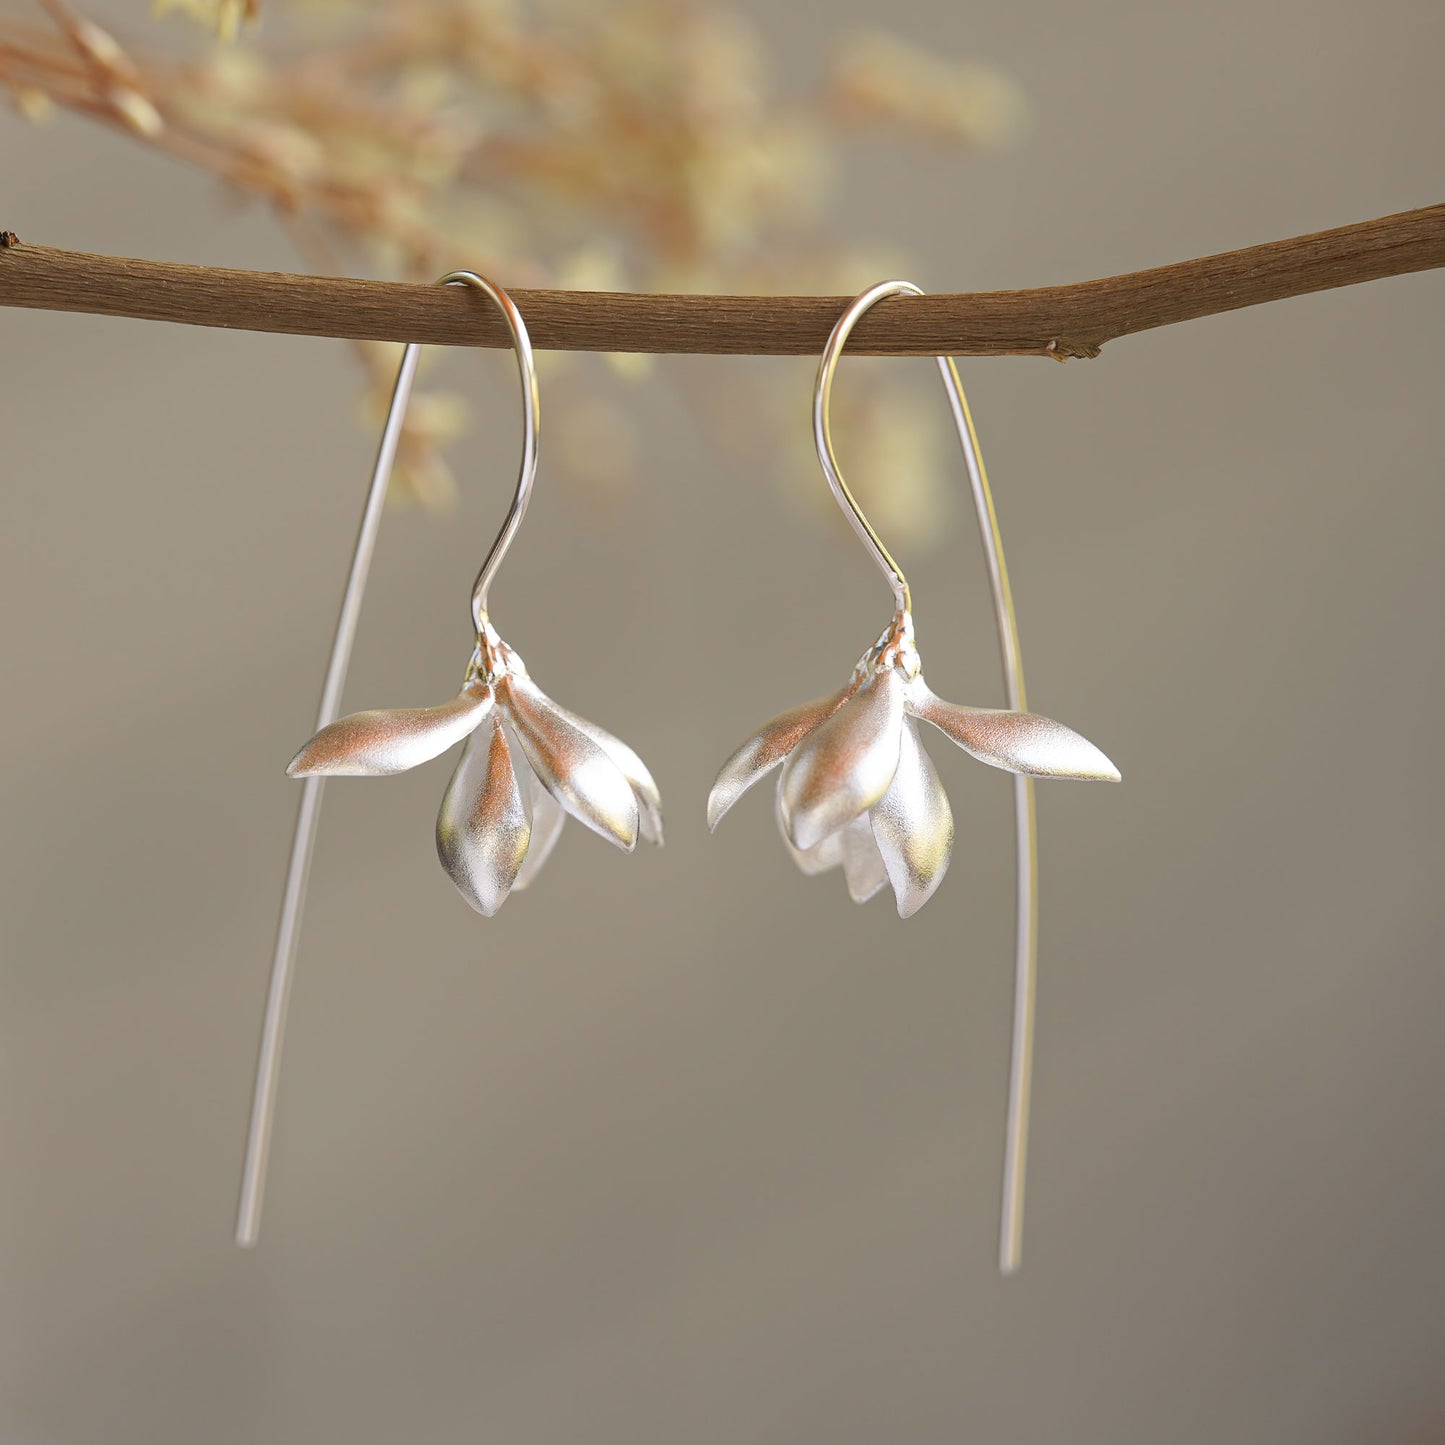 Silver magnolia earrings hanging from a tree branch